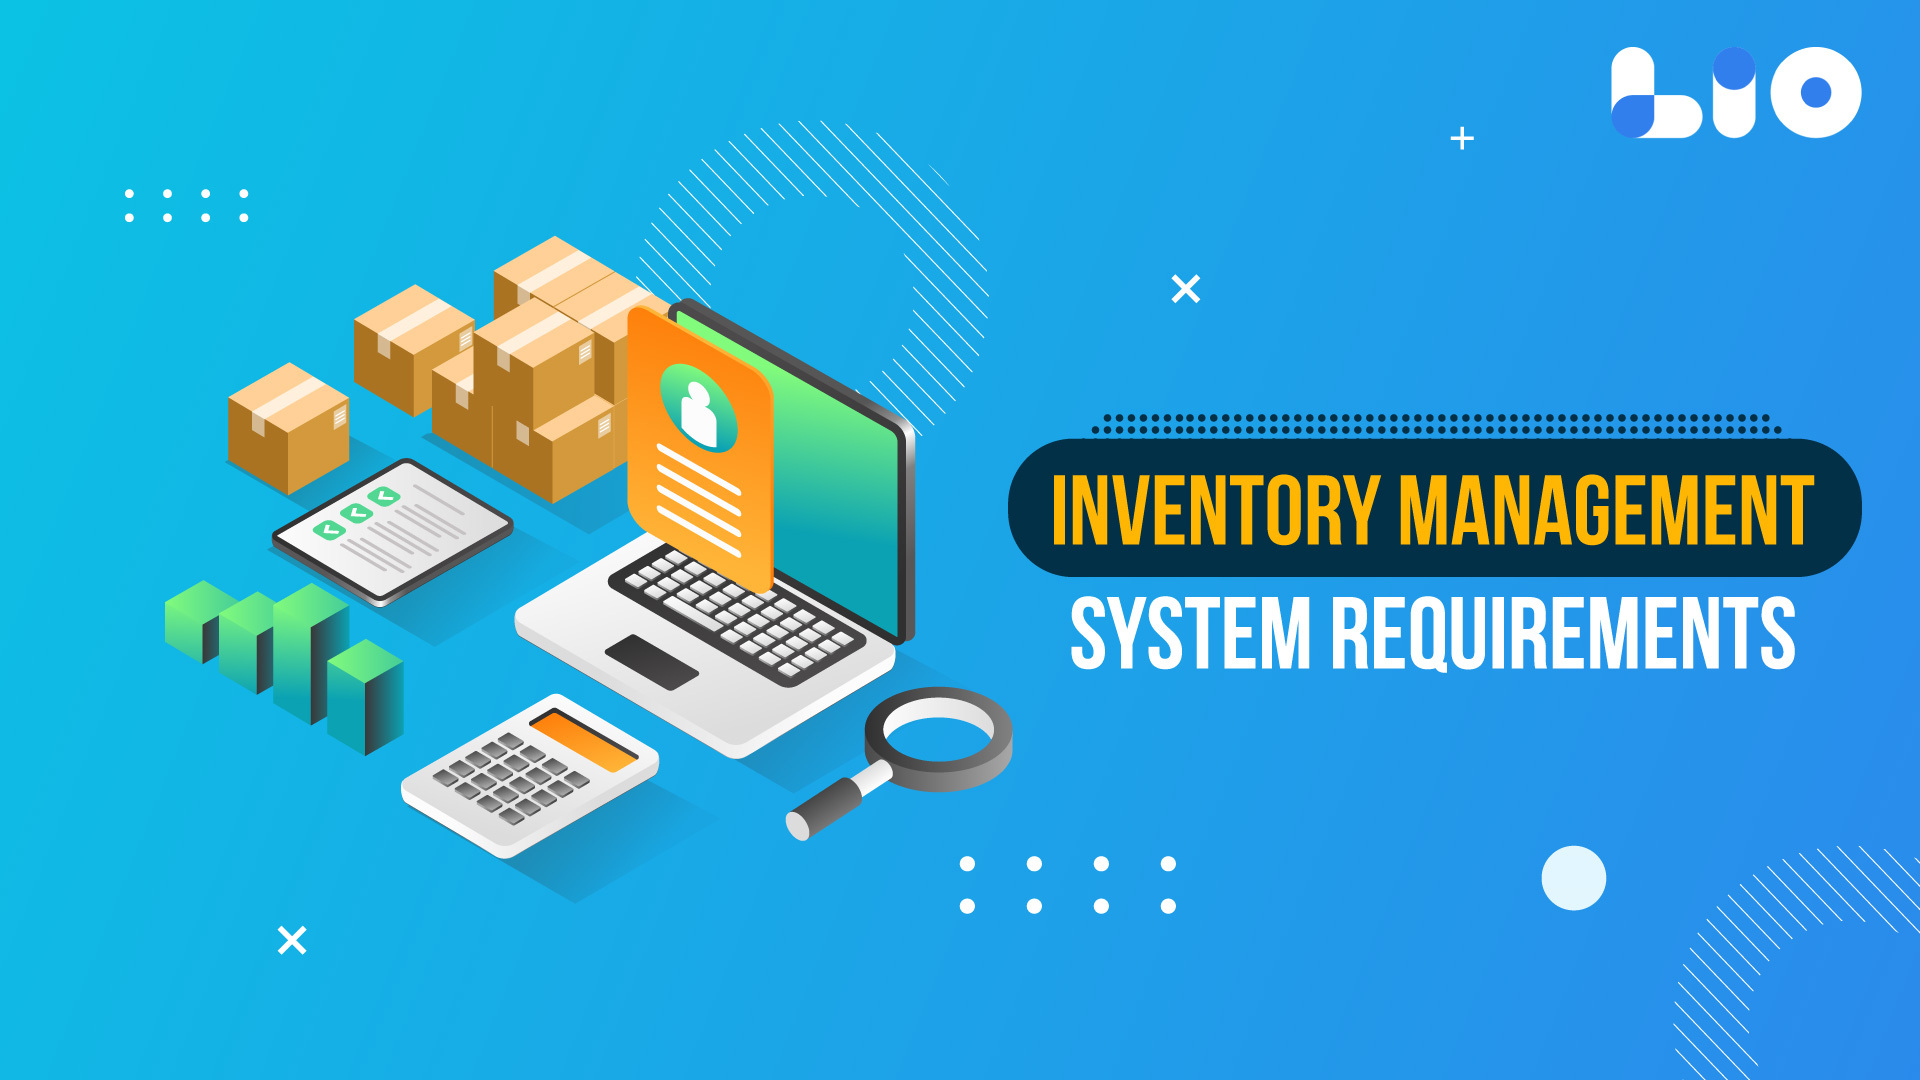 Meeting Inventory Management System Requirements: An Overview